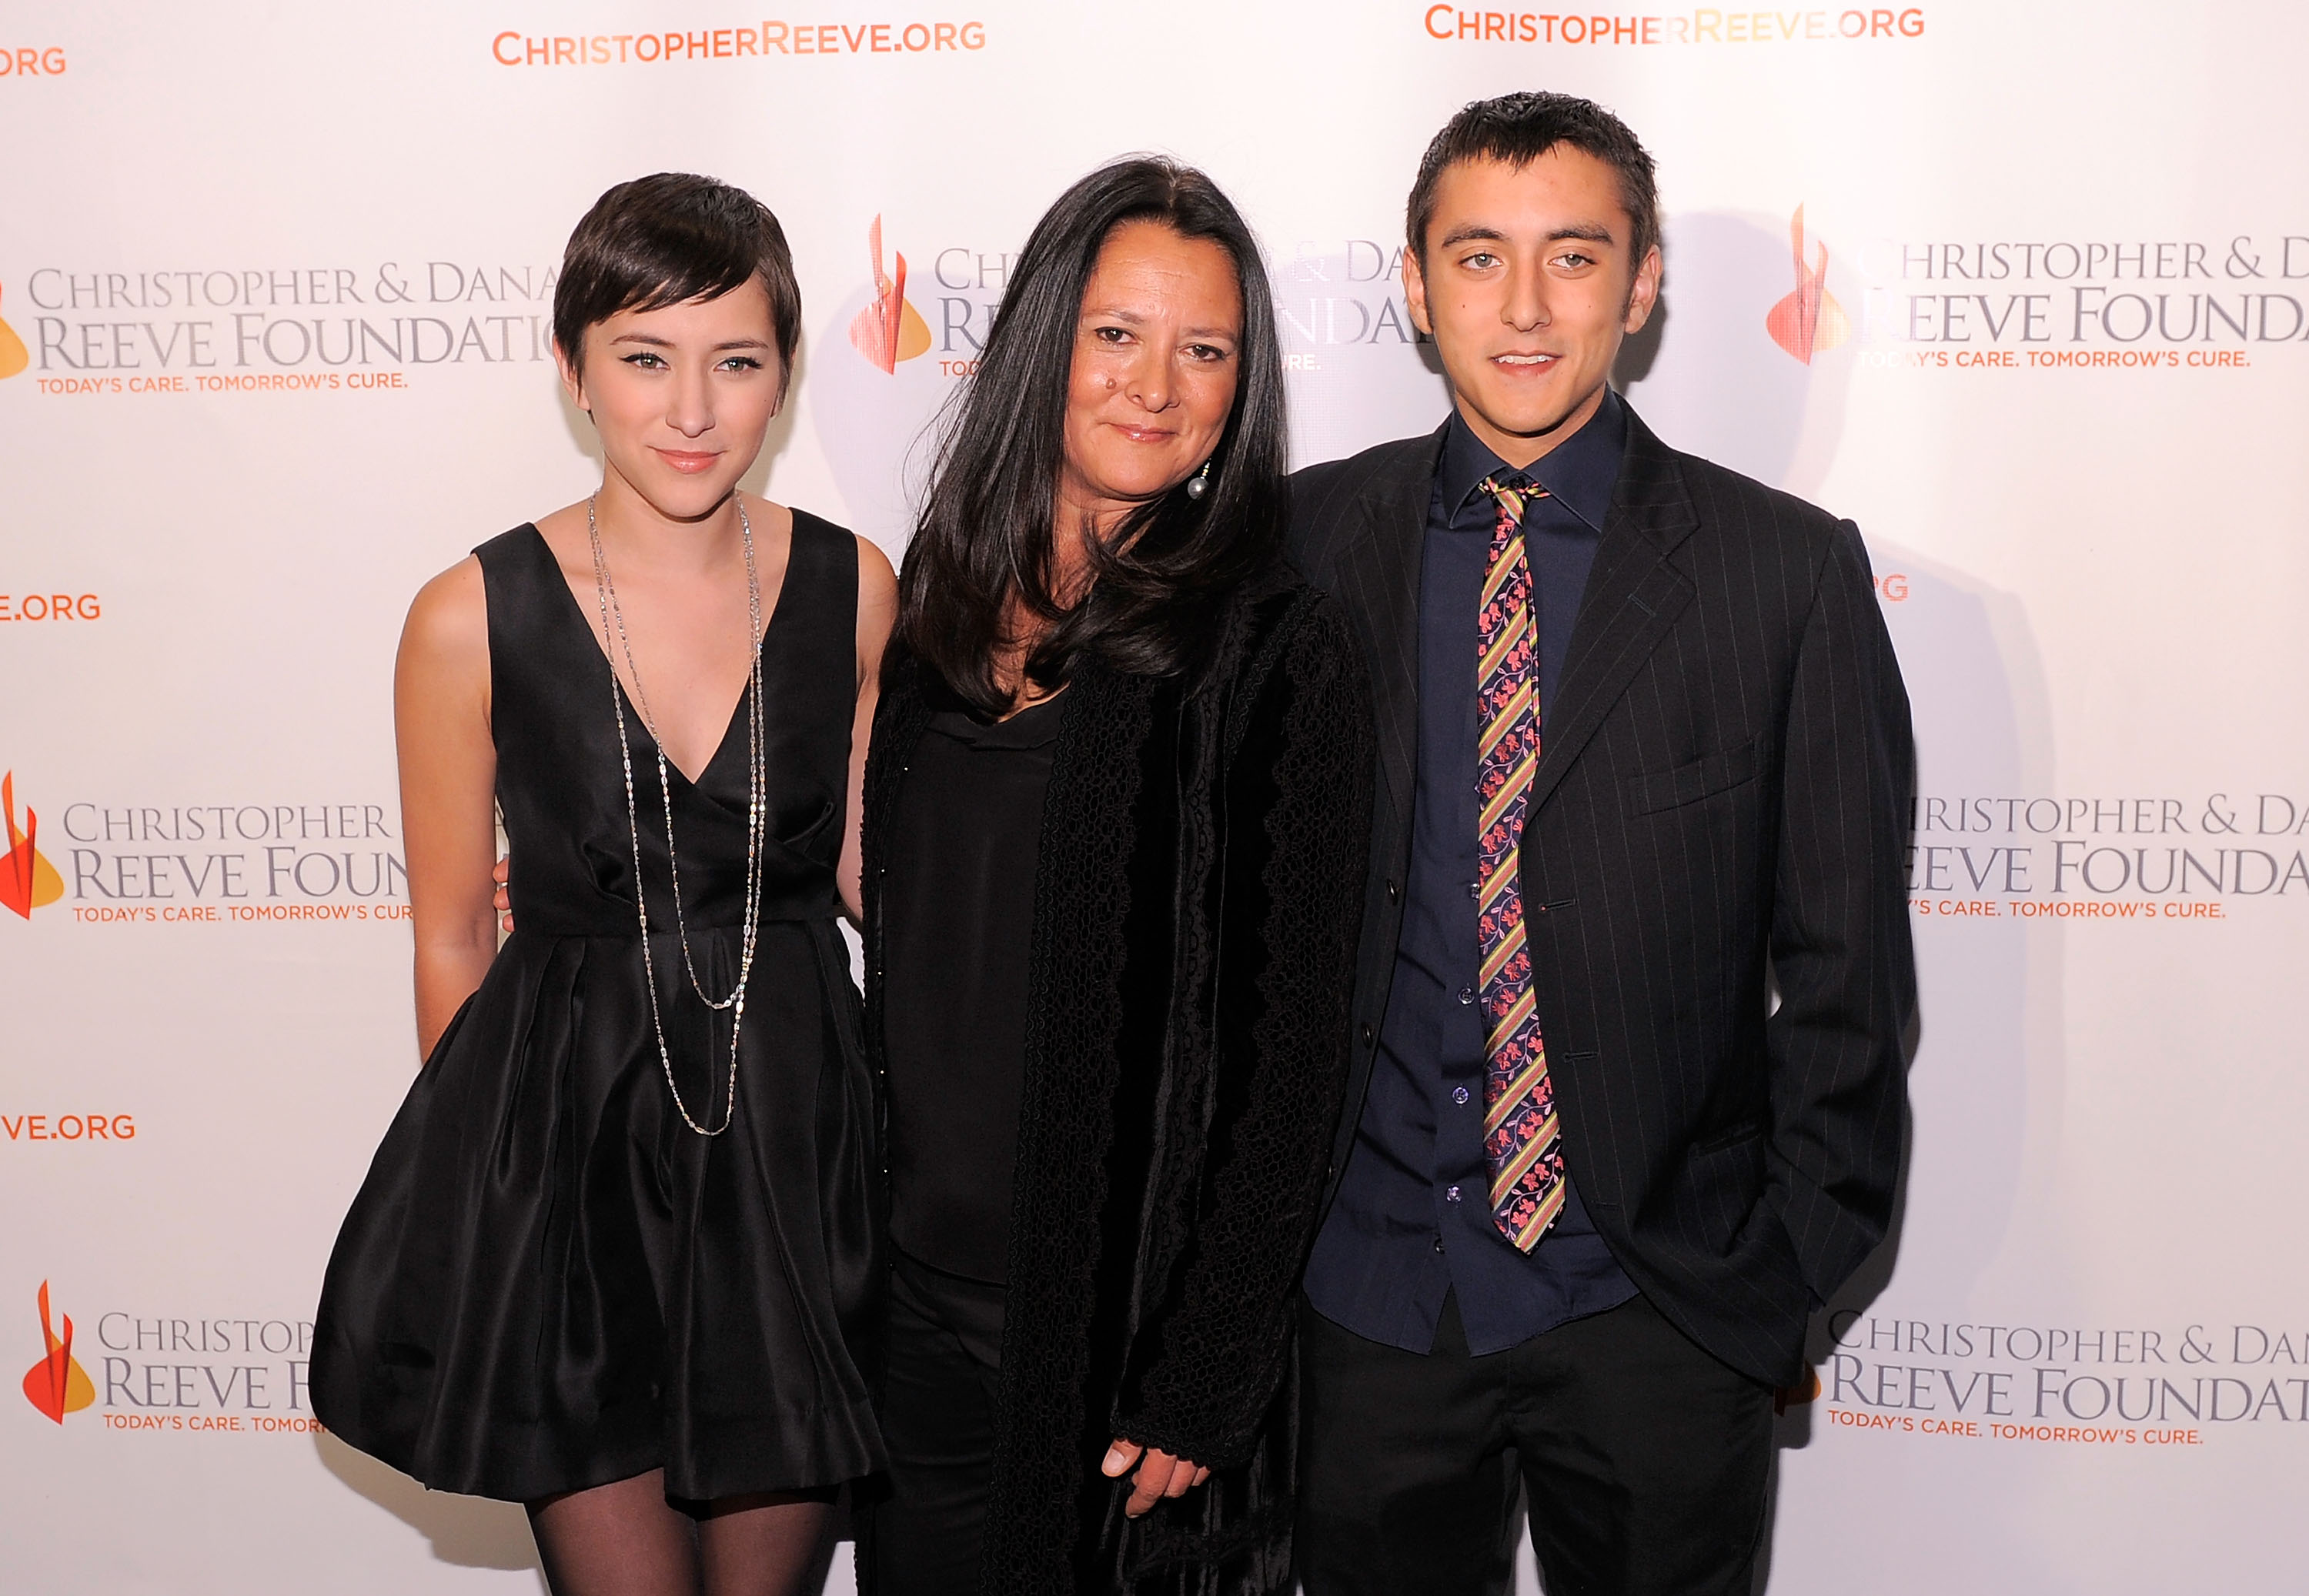 Zelda Williams, Marsha Williams, and Cody Alan Williams at the Christopher & Dana Reeve Foundation's A Magical Evening 20th Anniversary Gala in New York City on November 17, 2010 | Source: Getty Images